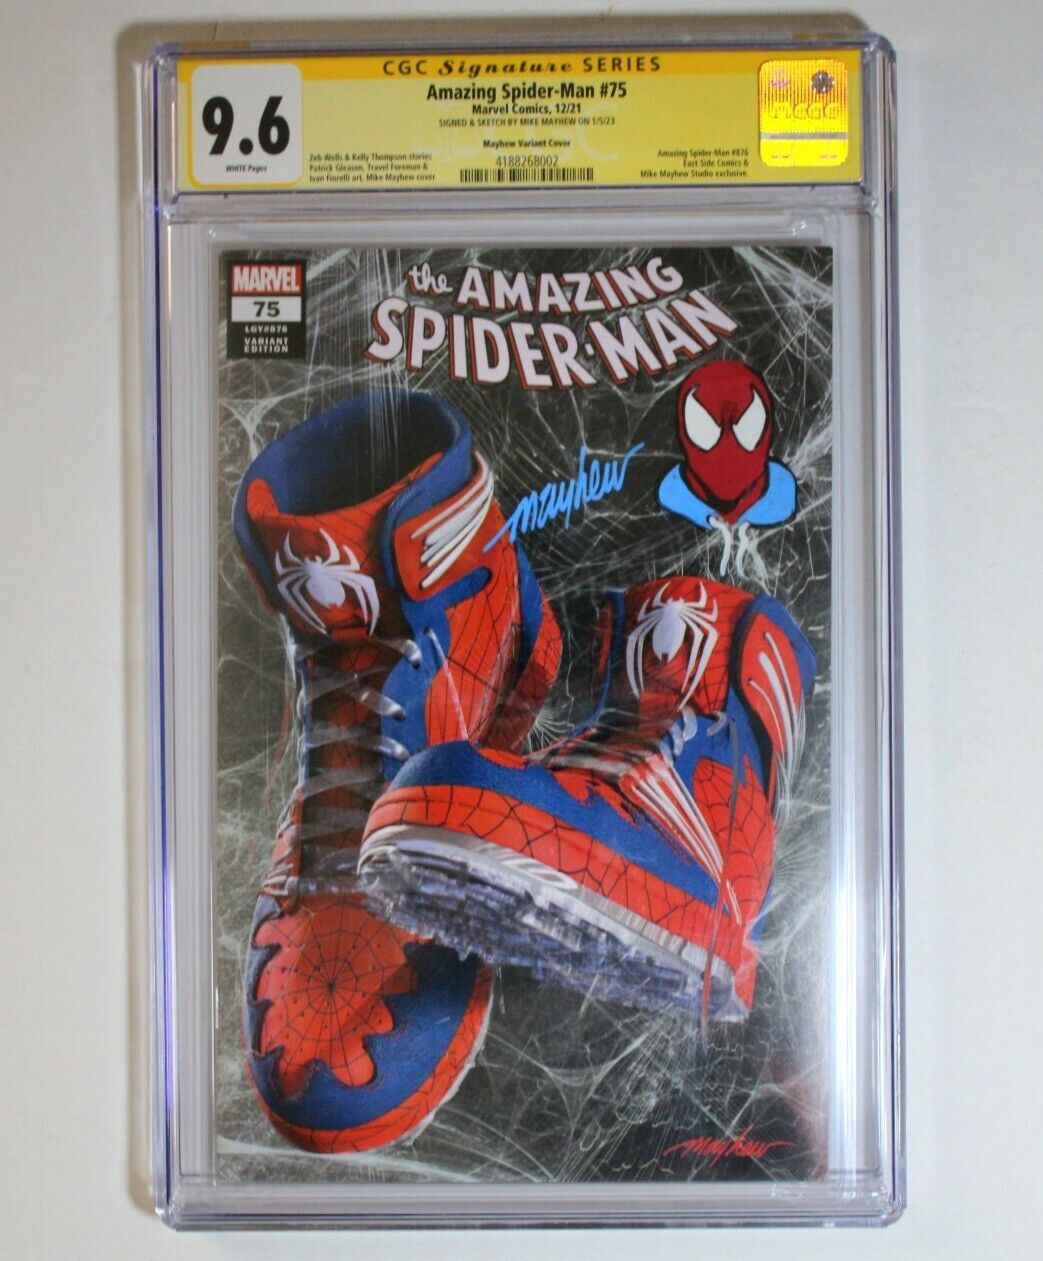 Amazing Spider-Man #75 CGC SS 9.6 Mike Mayhew Sneaker Variant SIGNED w/ ART